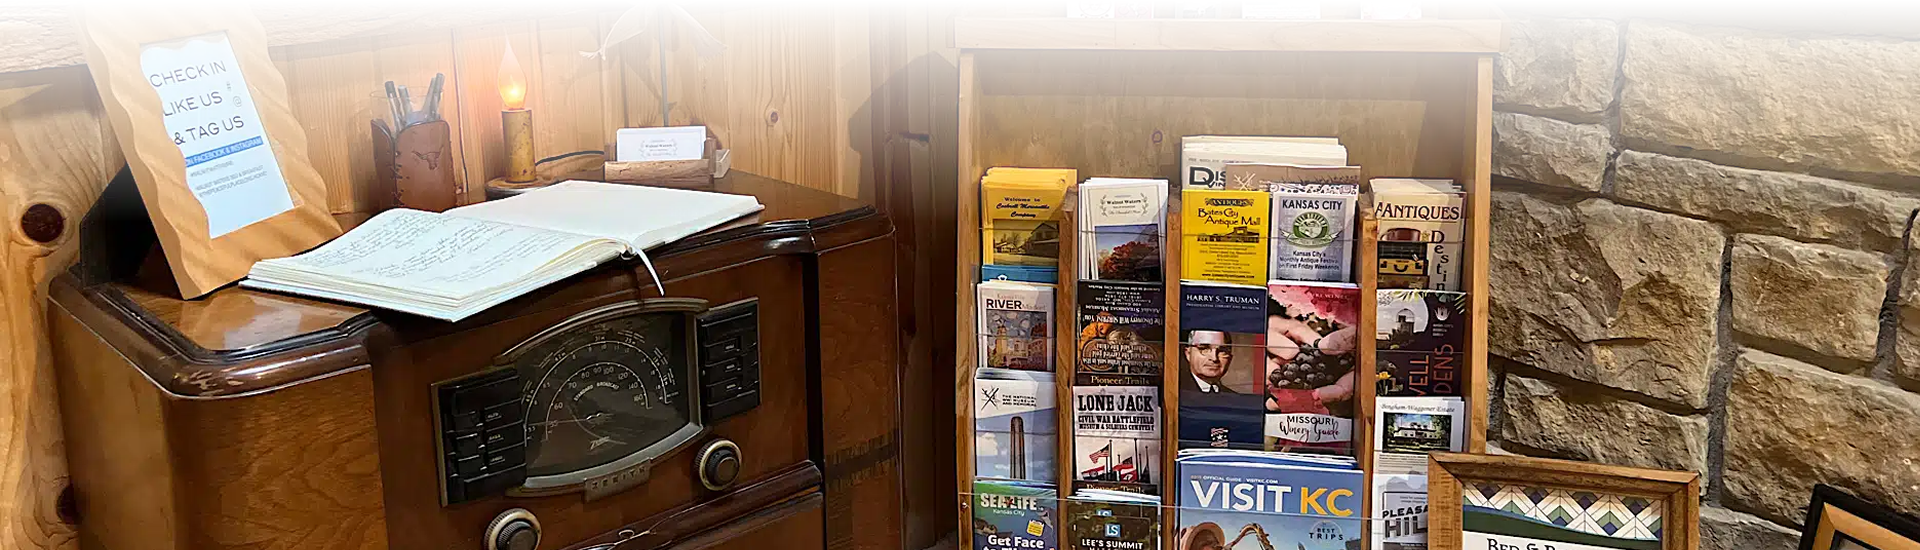 Old time radio and brochure rack at the inn